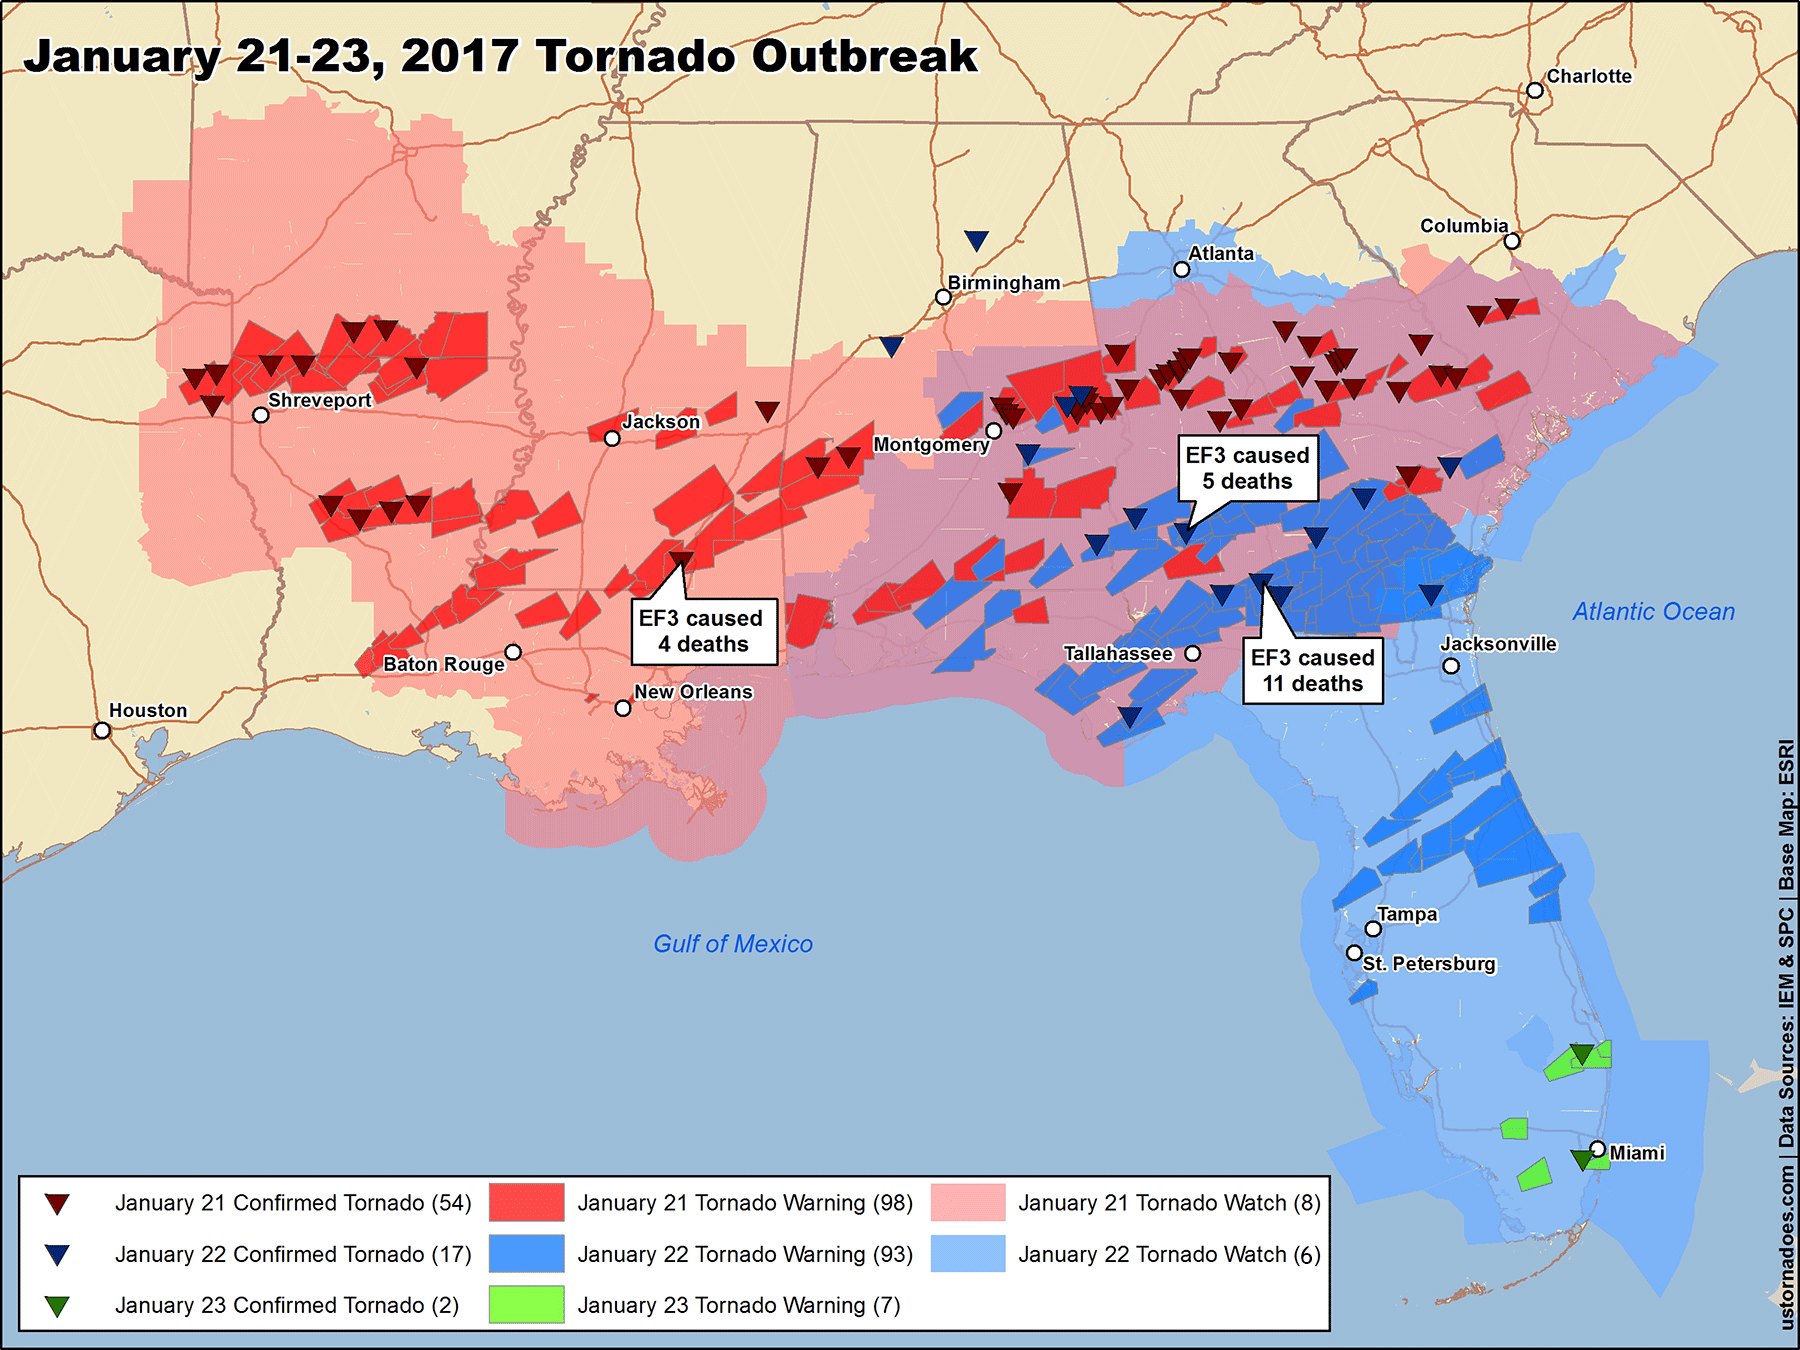 The largest tornado outbreaks of 2017